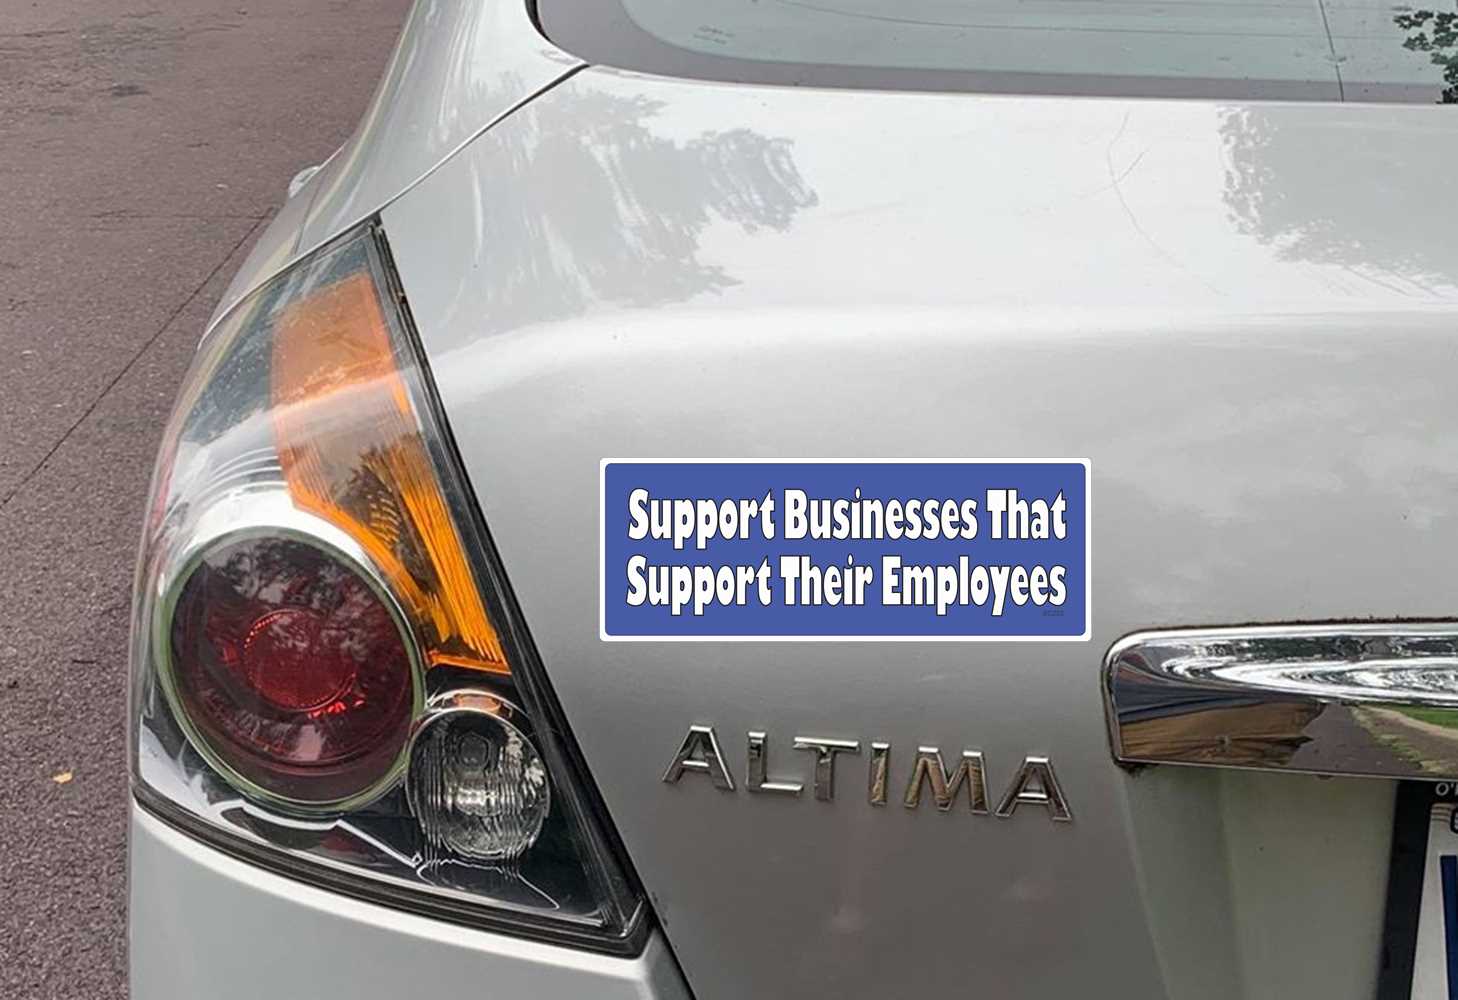 SUPPORT BUSINESSES THAT SUPPORT THEIR EMPLOYEES BUMPER STICKER ON CAR